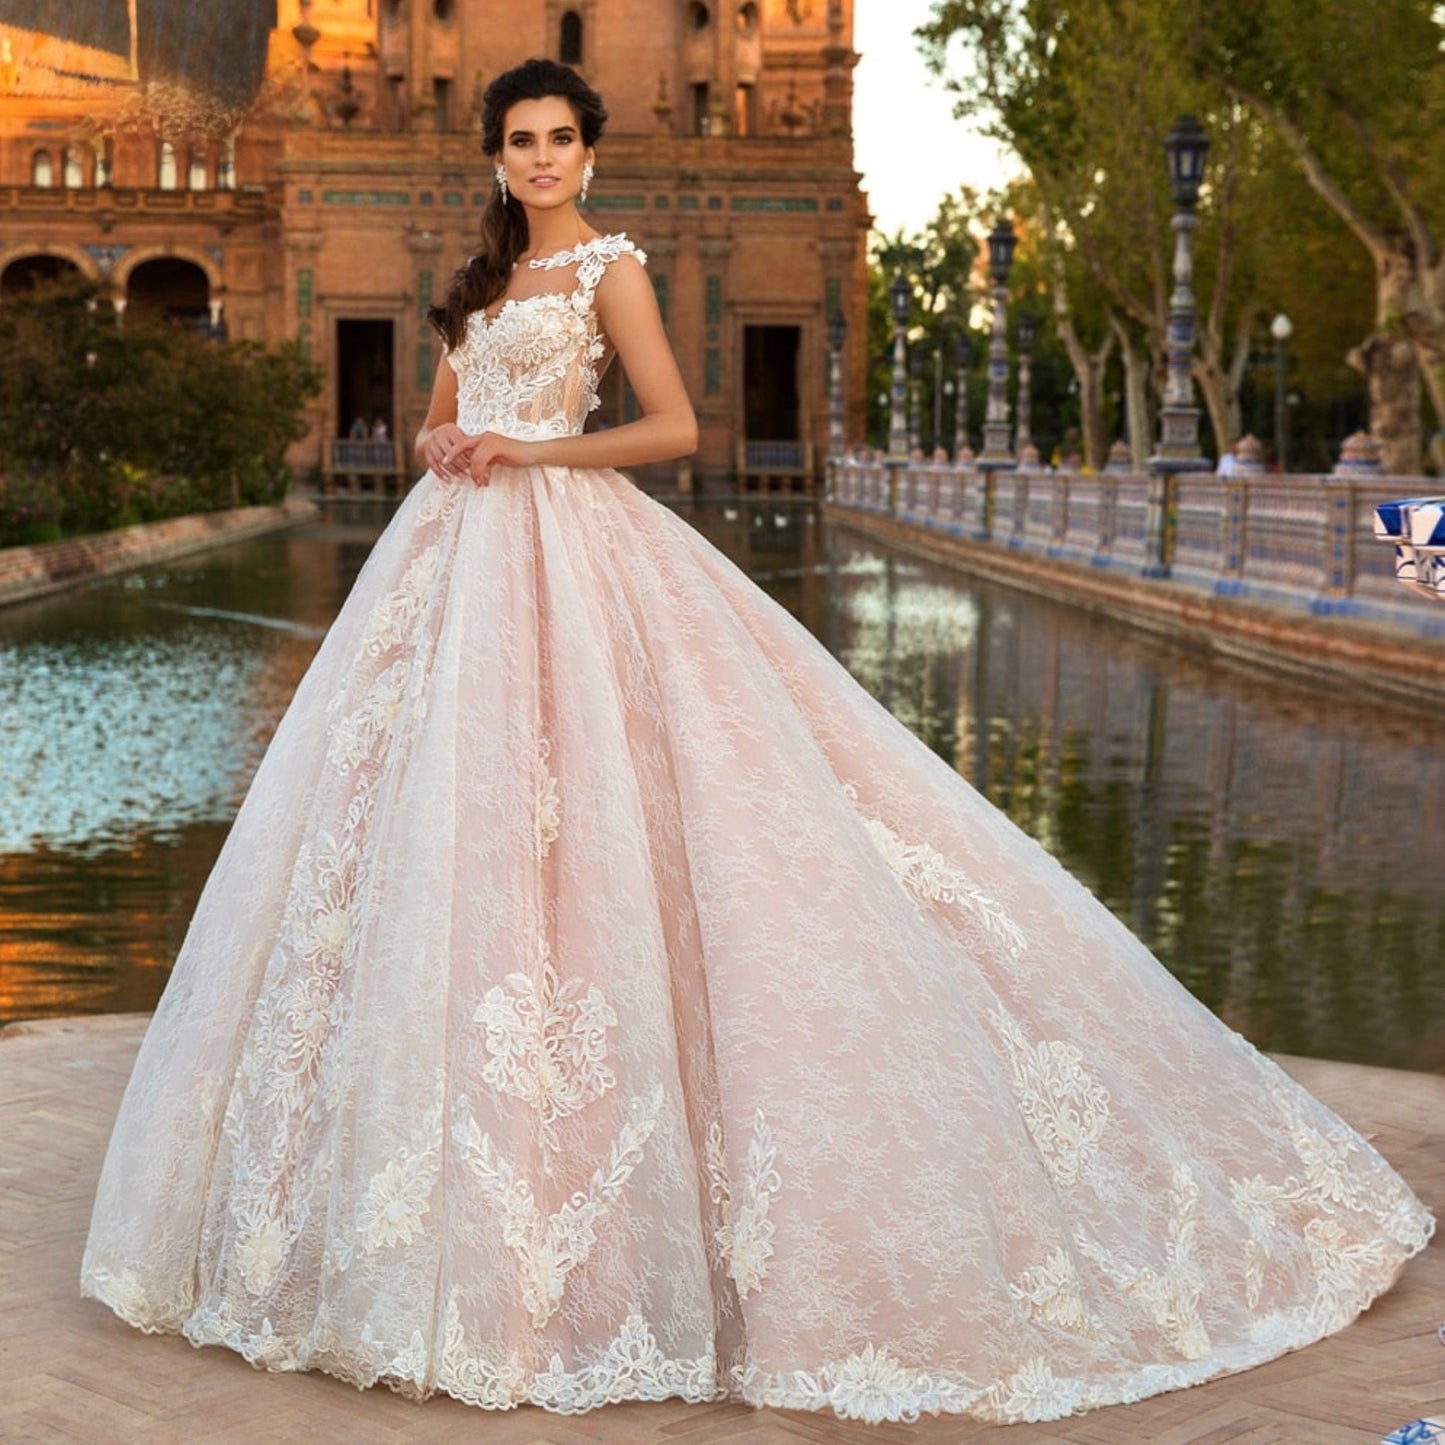 Luxurious Illusion Lace A-Line Wedding Bridal Ball Gown